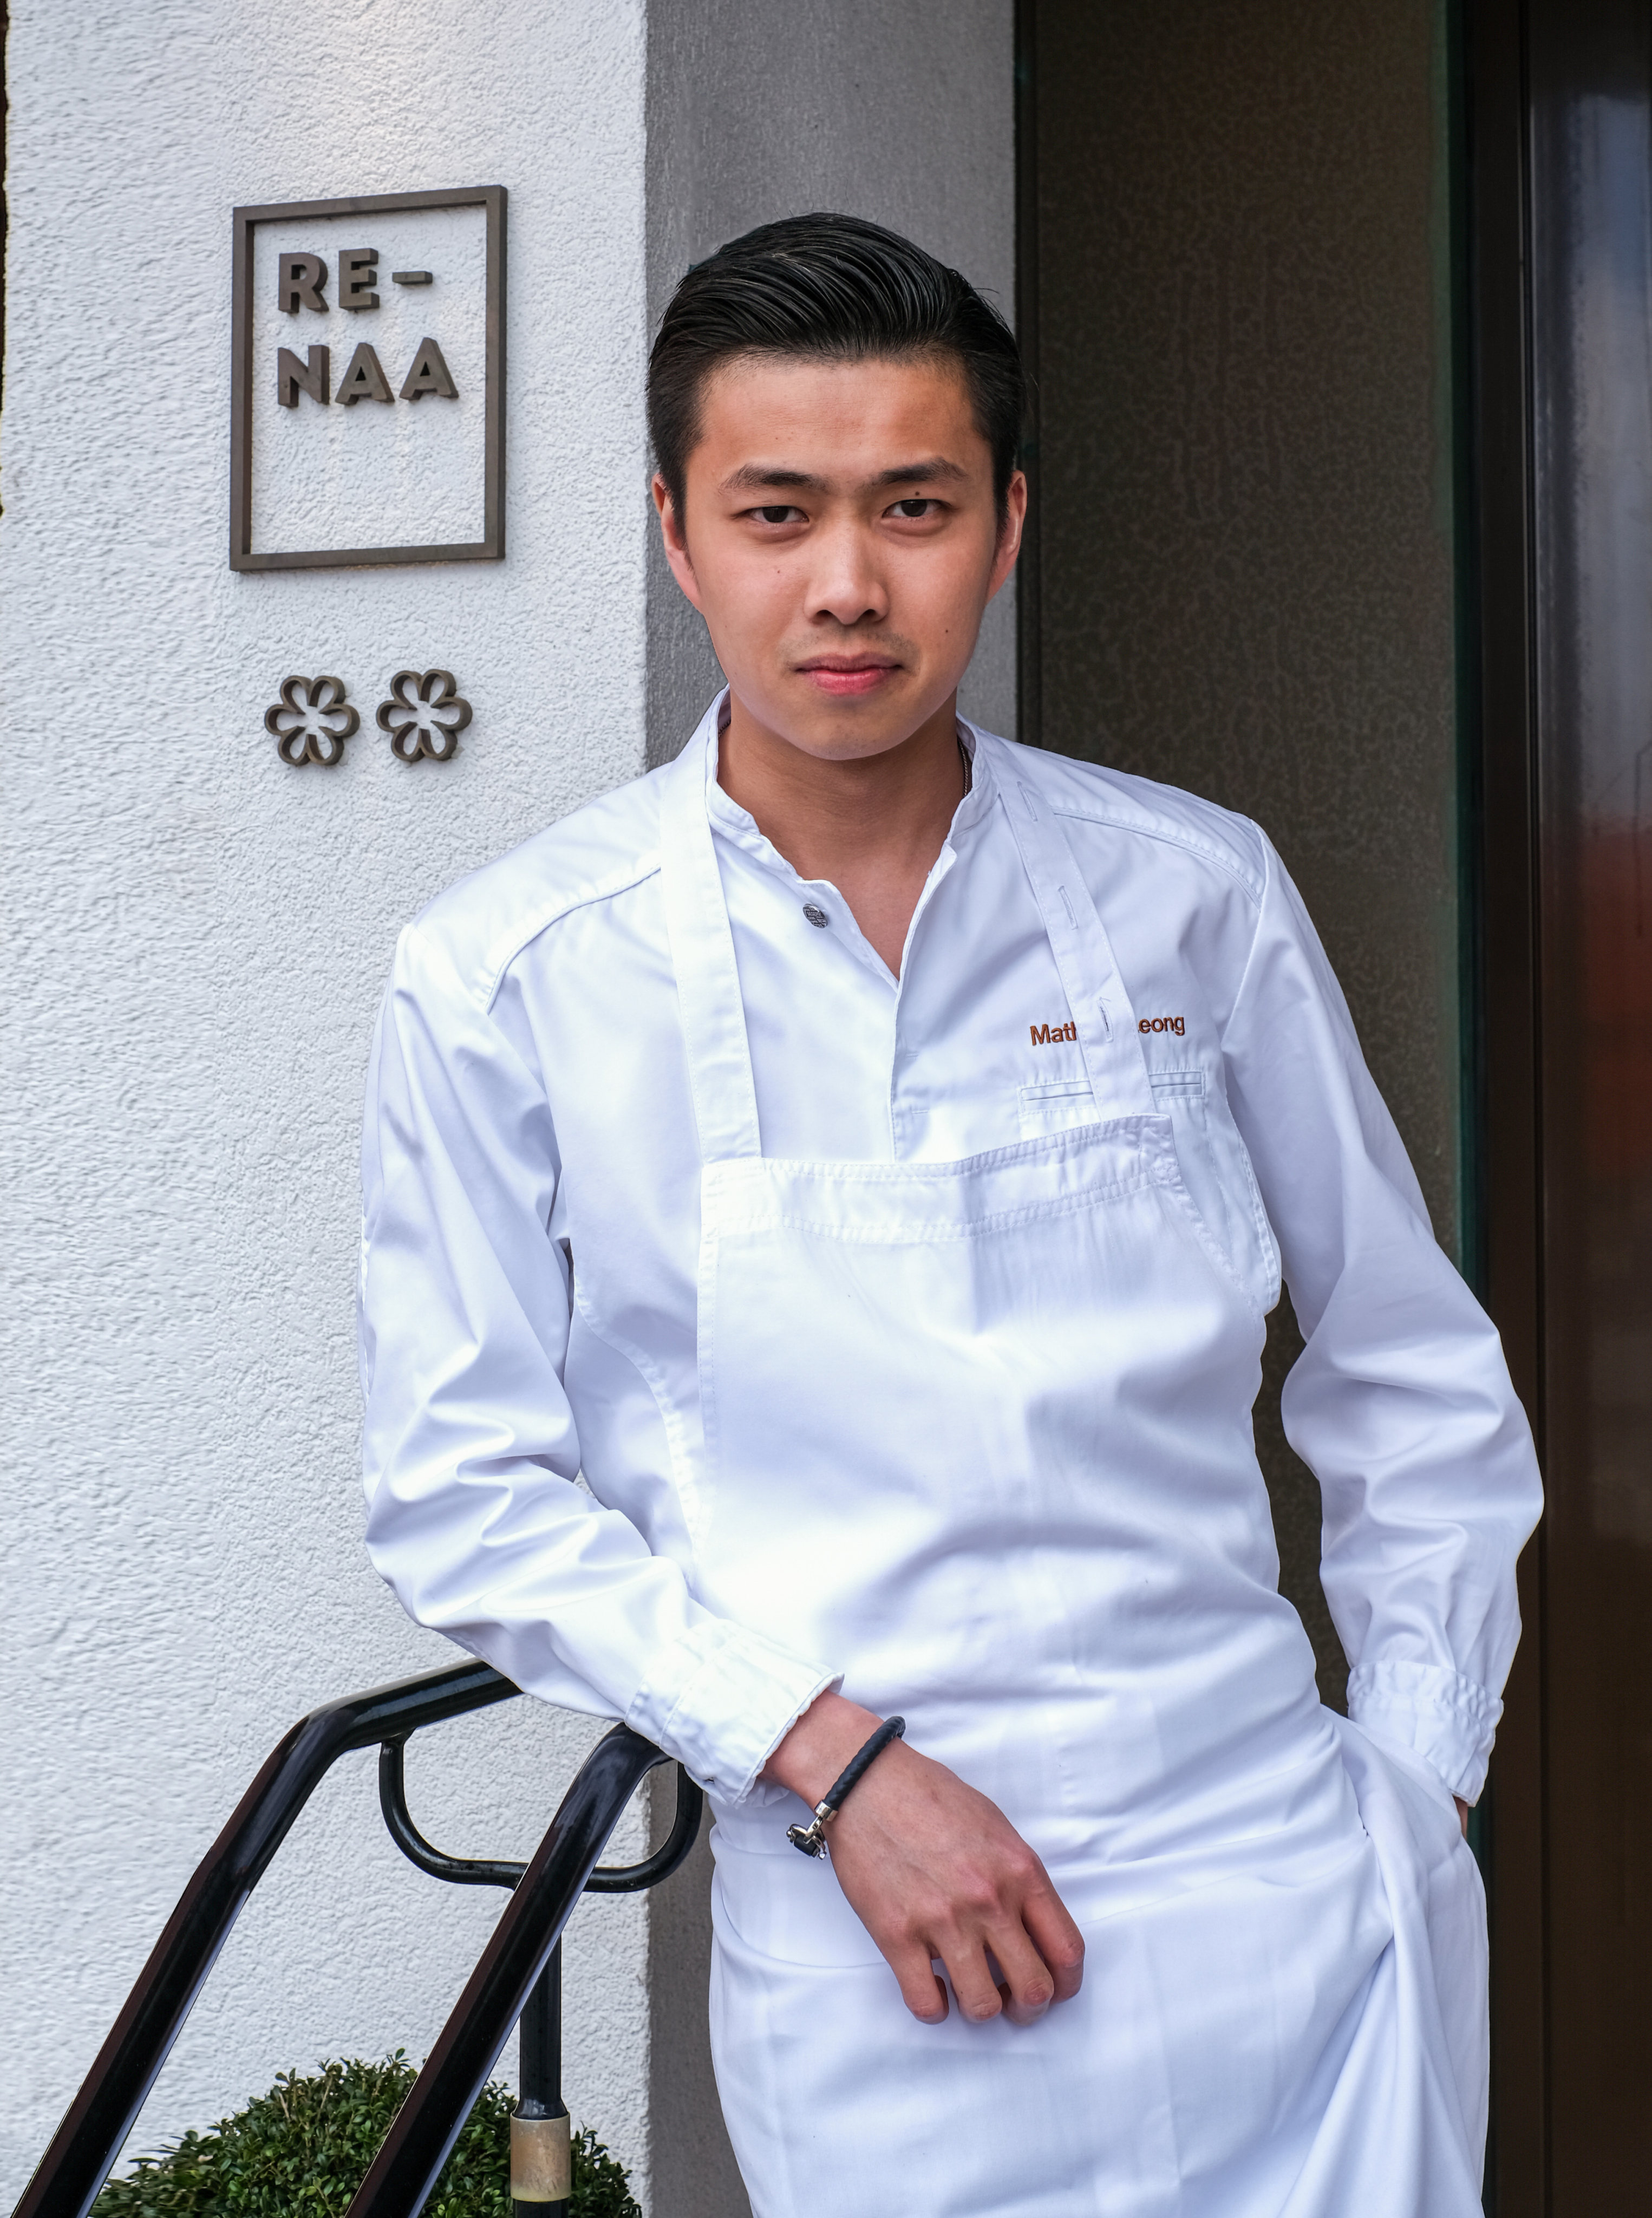 Mathew Leong is head chef at Norway’s two-Michelin-star Re-Naa, which was also named one of the country’s best restaurants. His ambition is to win the prestigious Bocuse d’Or world chef championship. Photo: Re-Naa